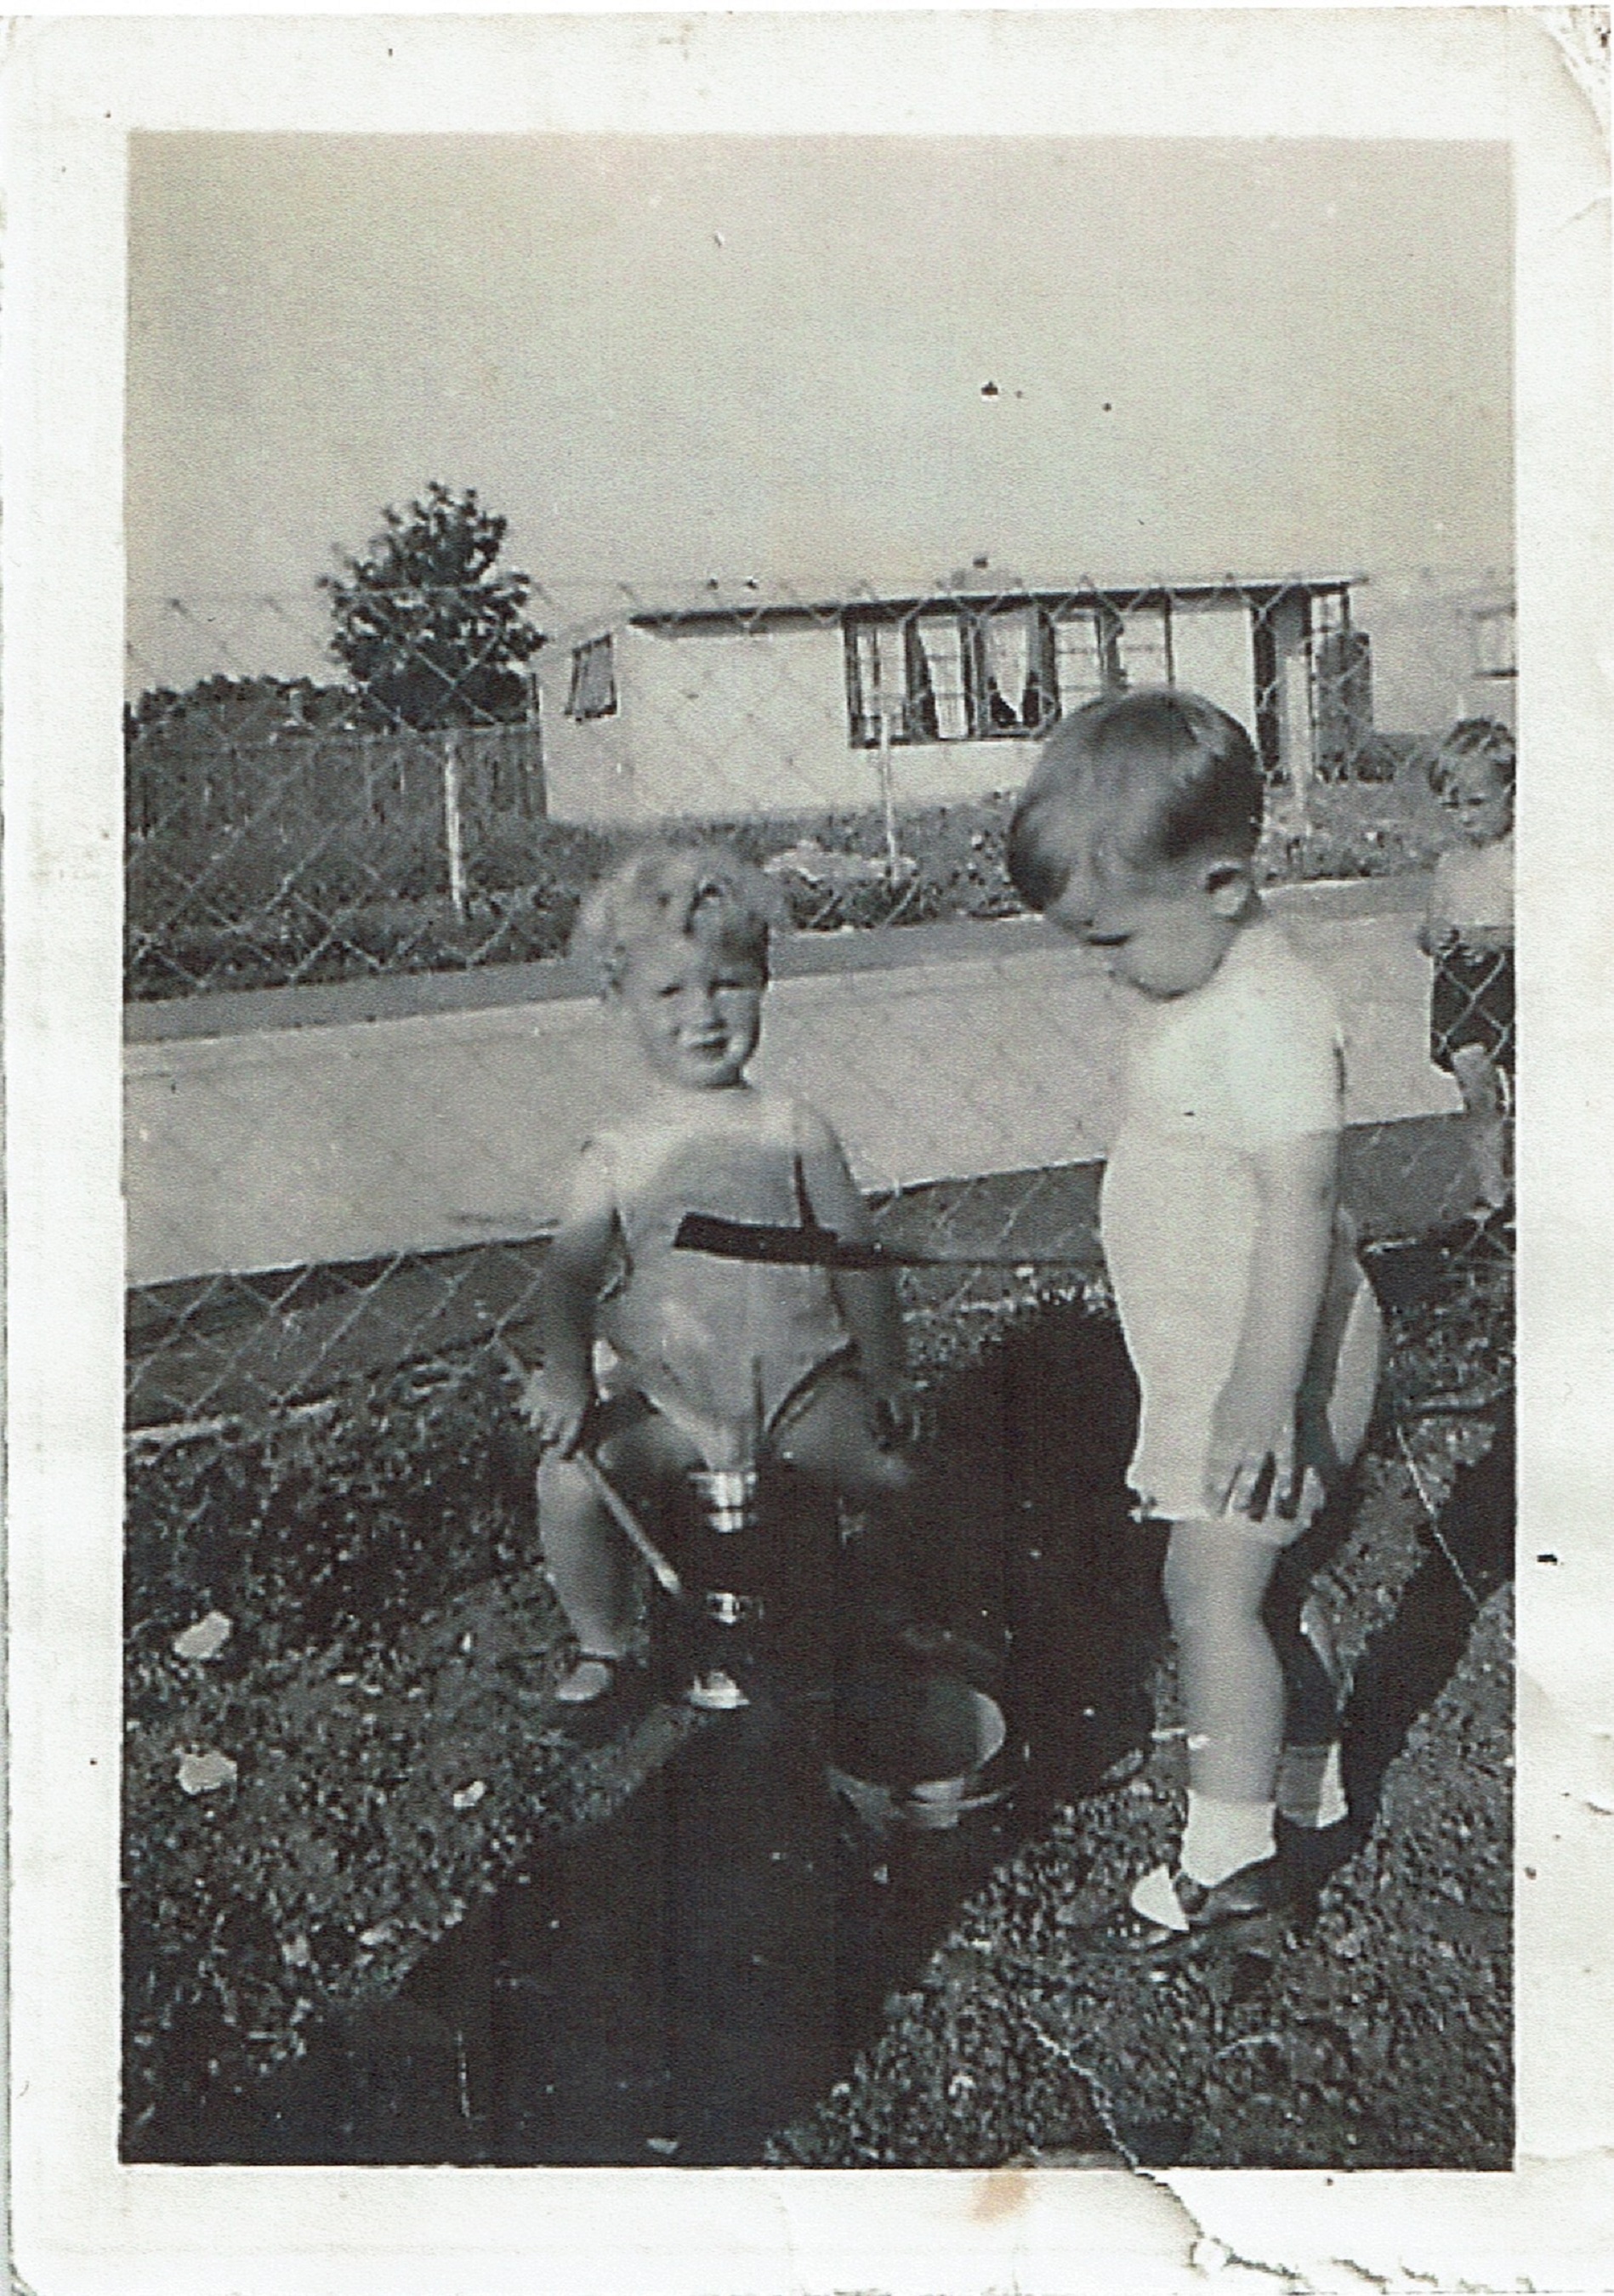 Two small children playing with buckets and spades in the prefab garden, Clement Road, Willesden